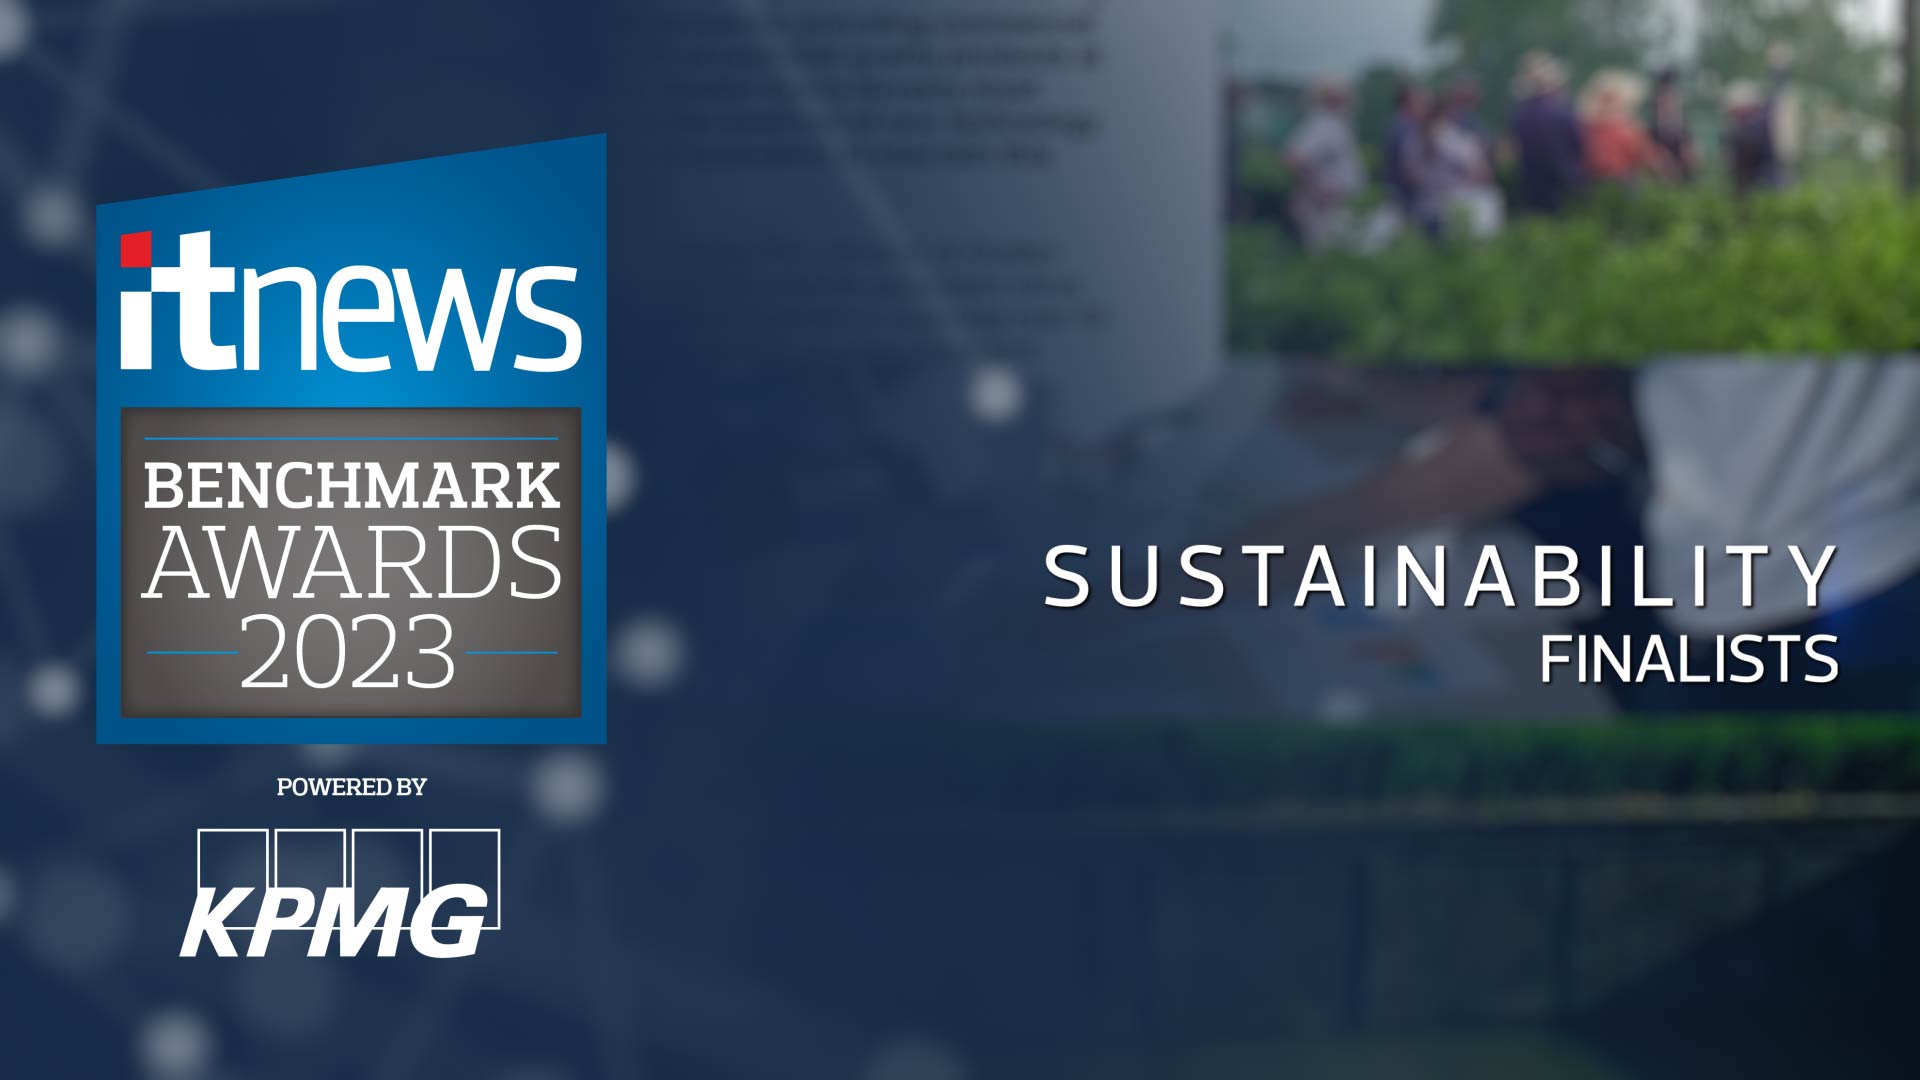 Meet the Sustainability Finalists in the 2023 iTnews Benchmark Awards